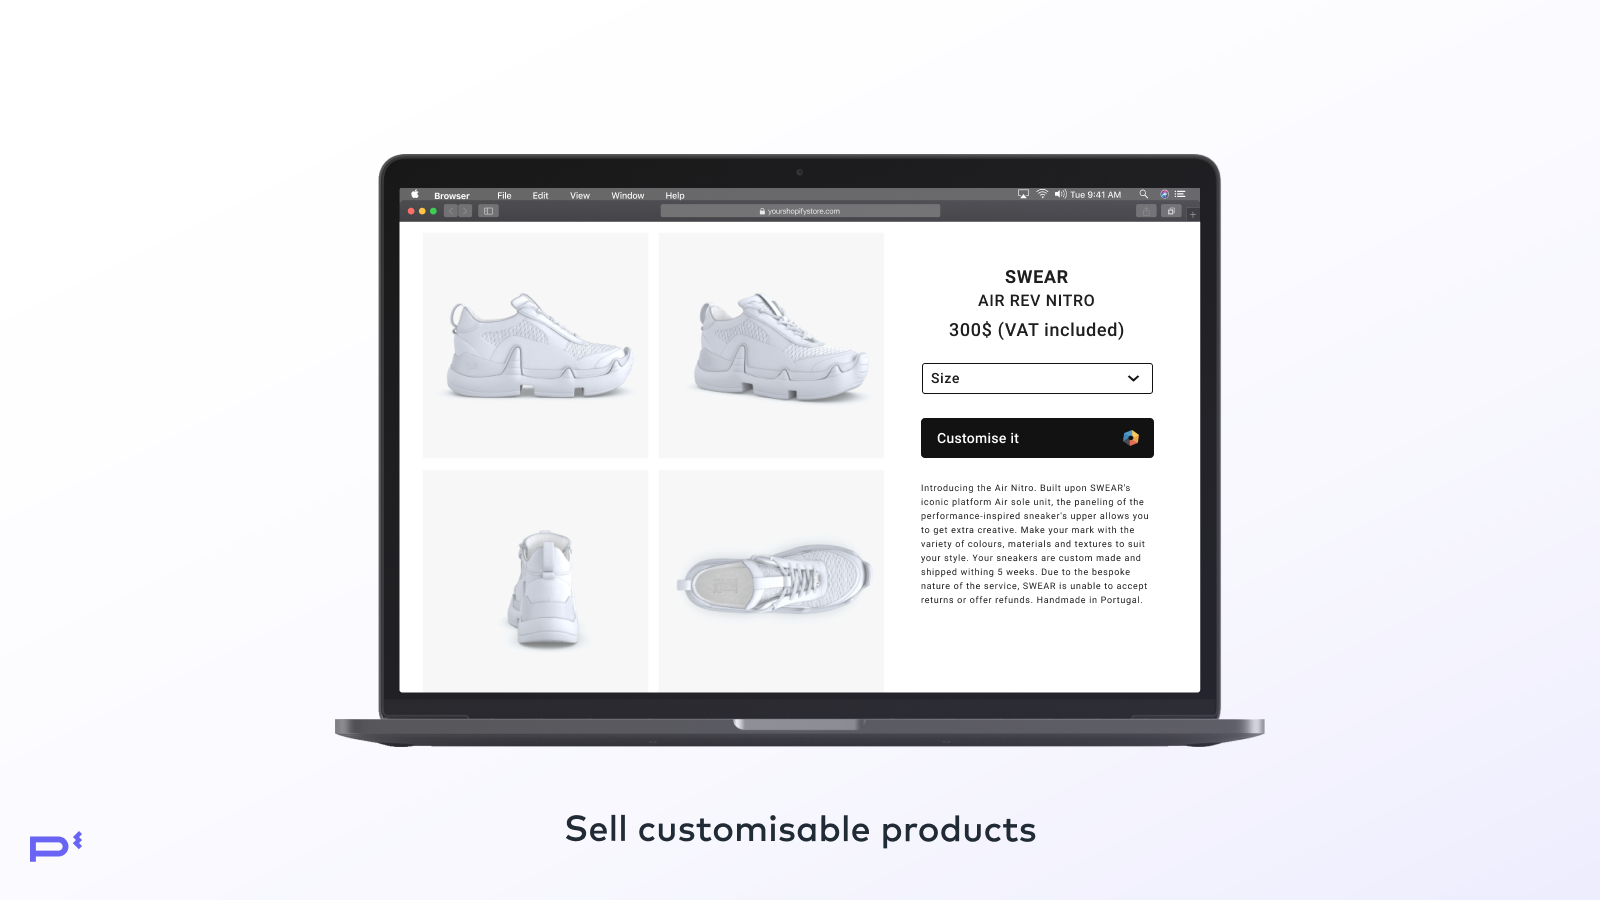 Customizable products